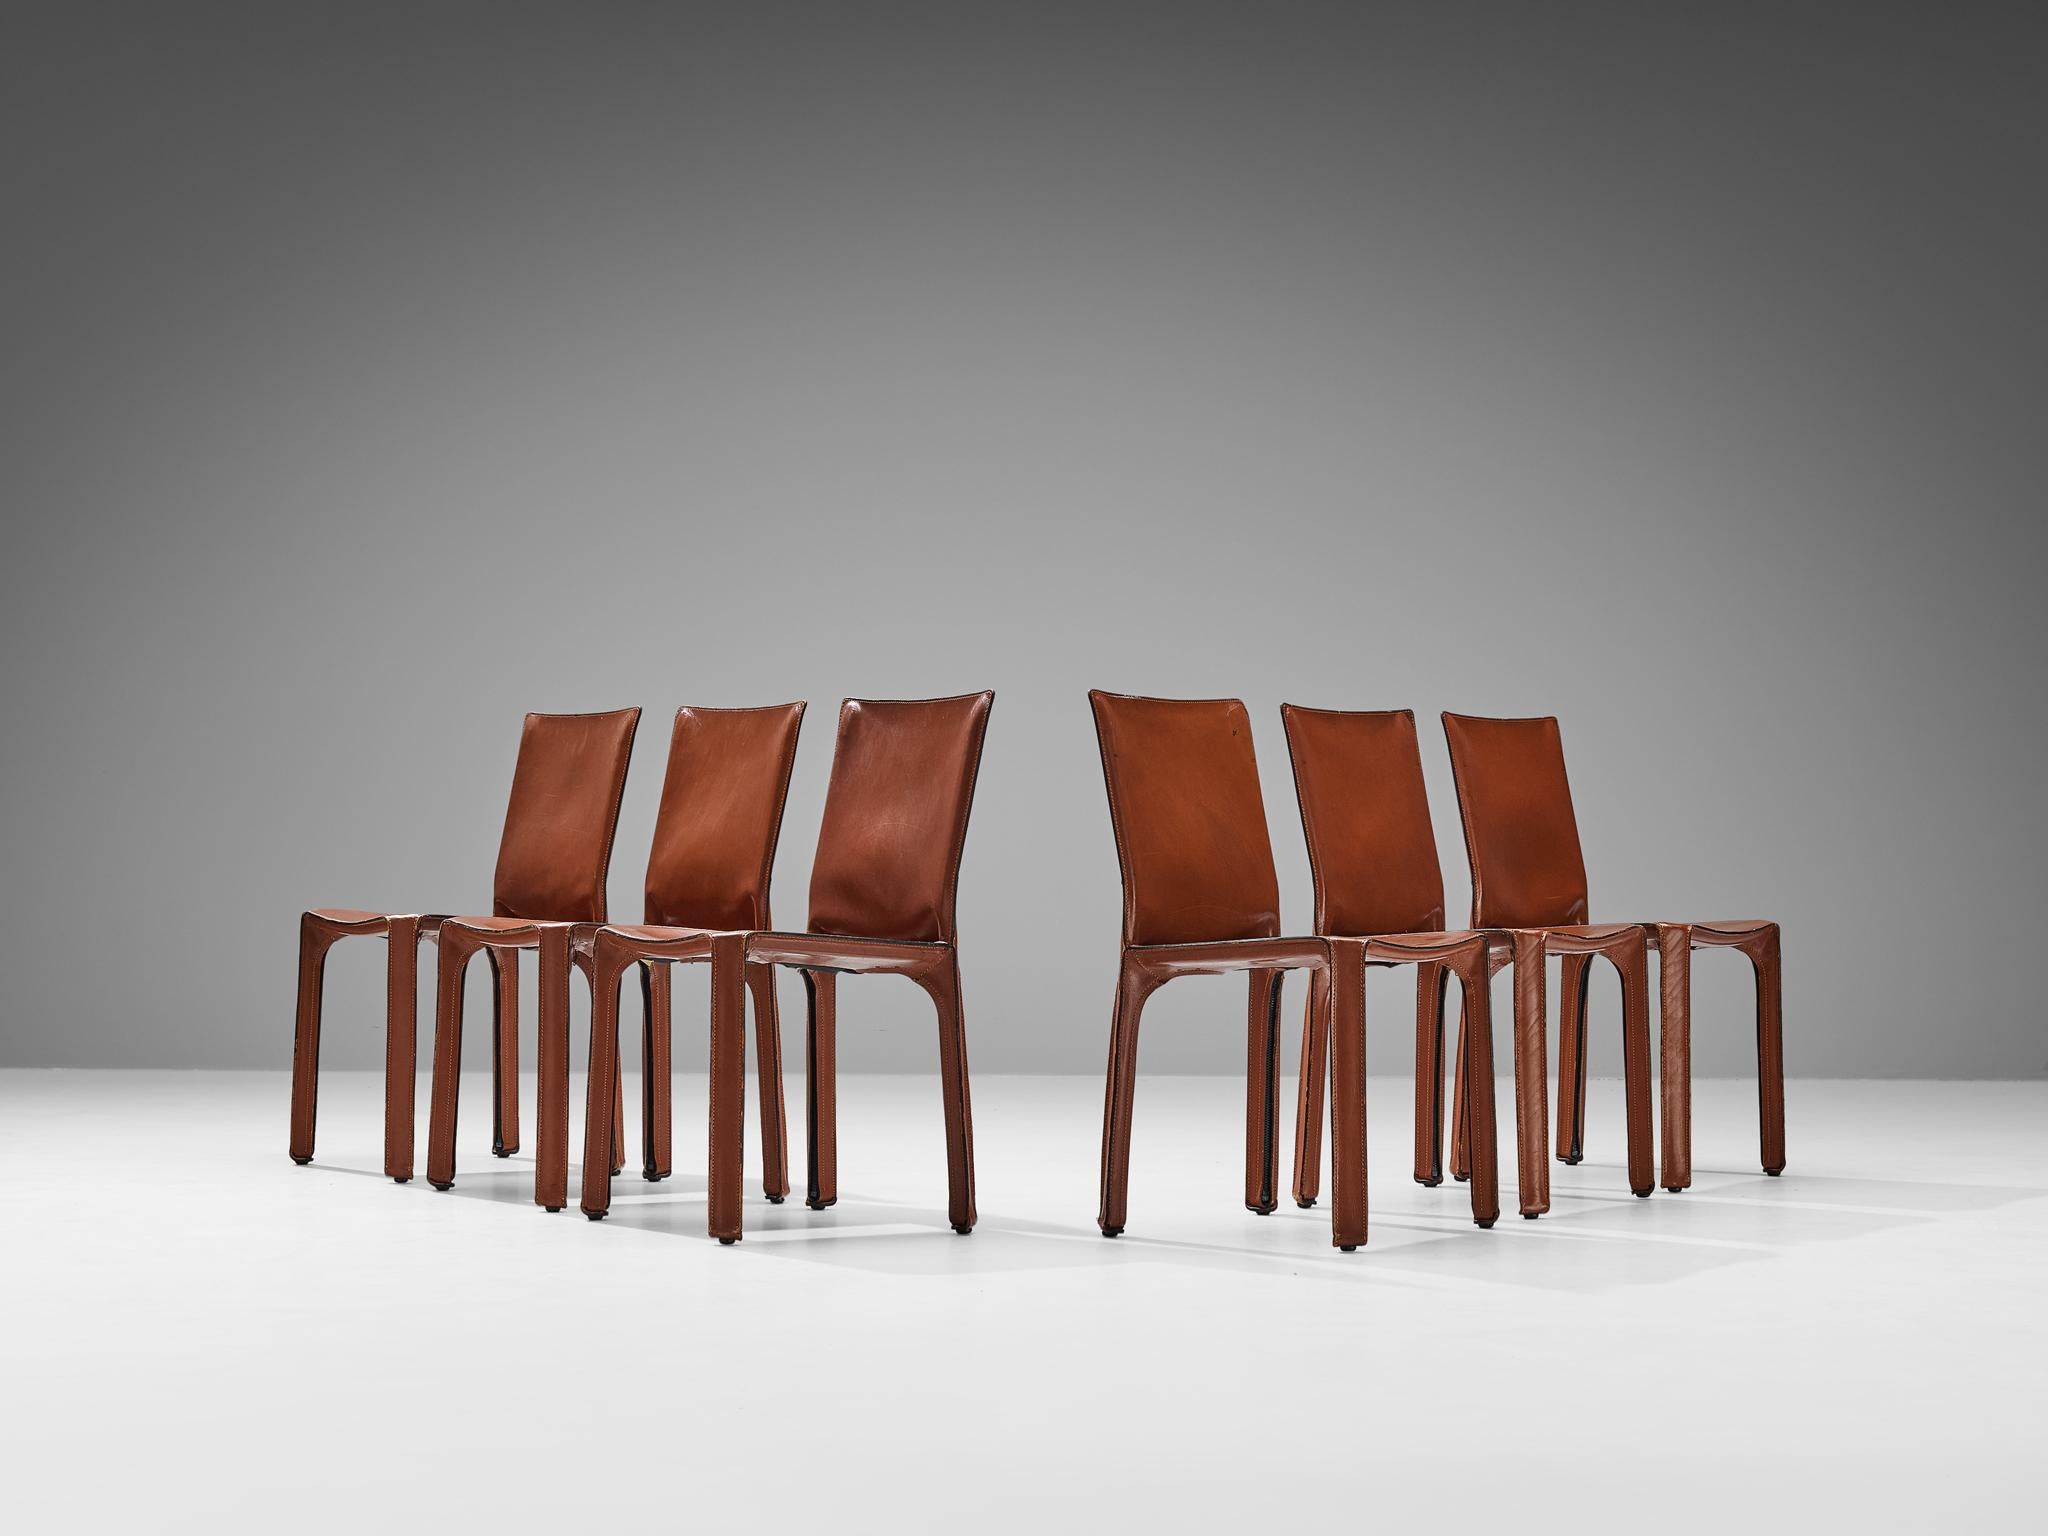 Mario Bellini for Cassina, set of six 'cab' dining chairs model 412, cognac leather, Italy, 1976.

Beautiful set of six chairs in a rich red cognac leather designed by Mario Bellini. Conceptually, the chair was designed to become marked and shaped